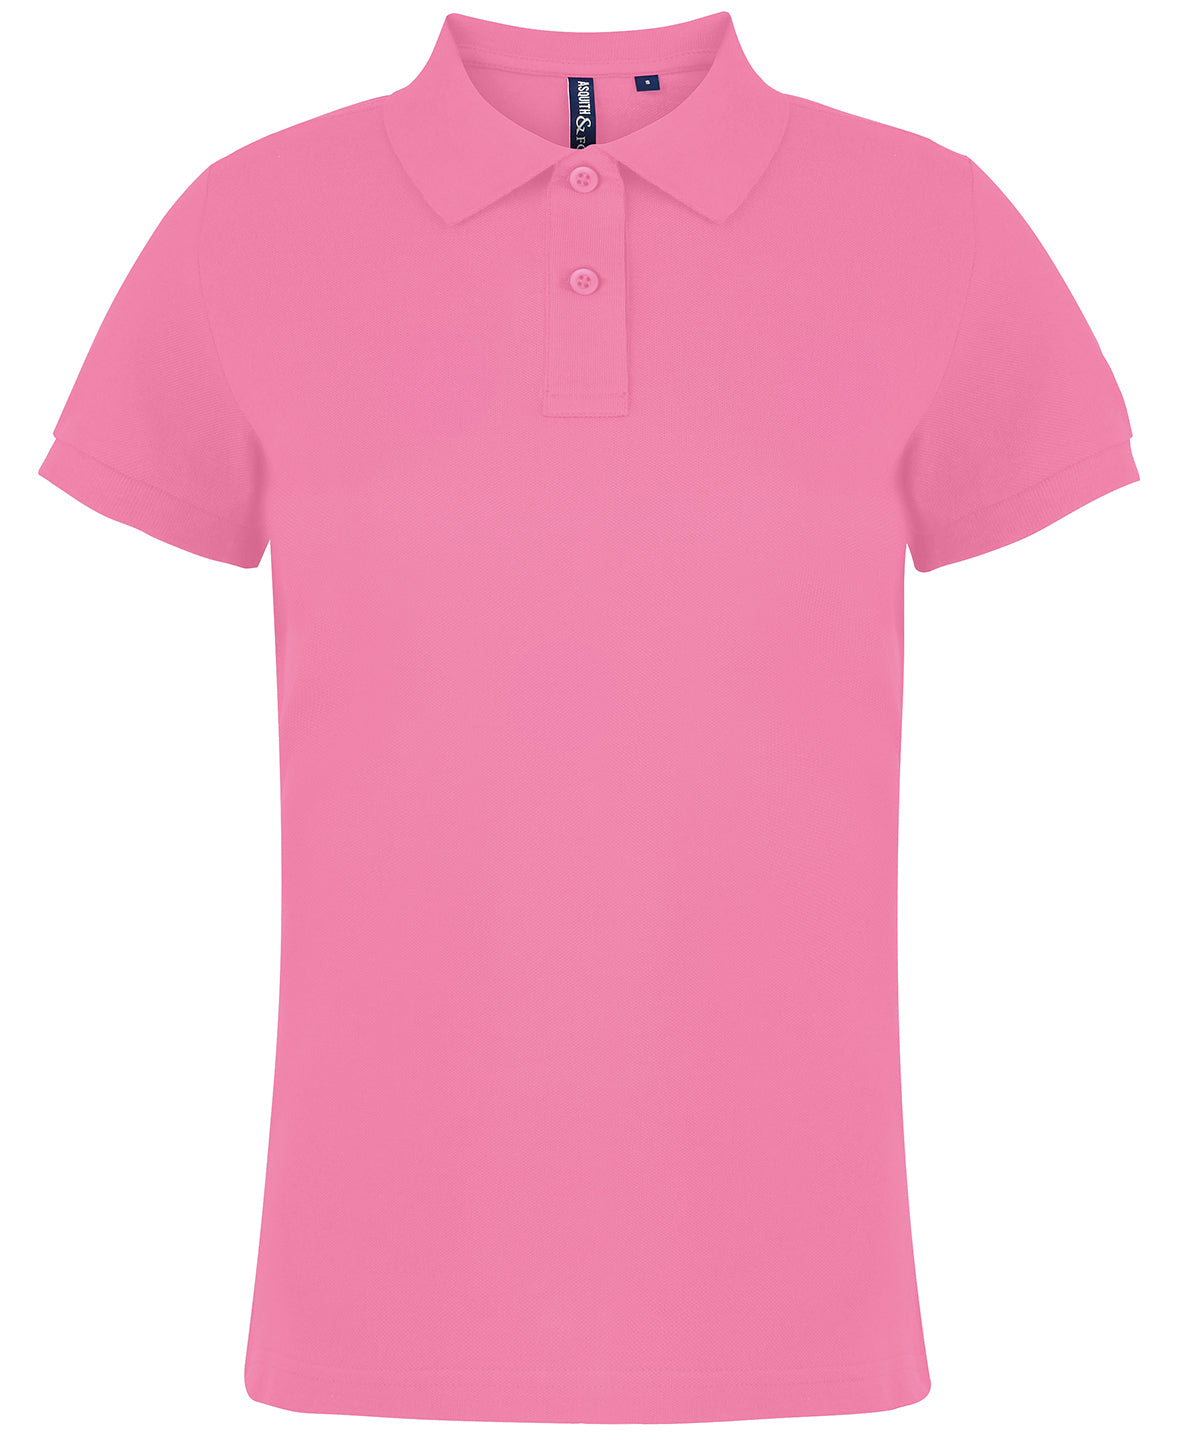 Personalised Polo Shirts - Burgundy Asquith & Fox Women's polo